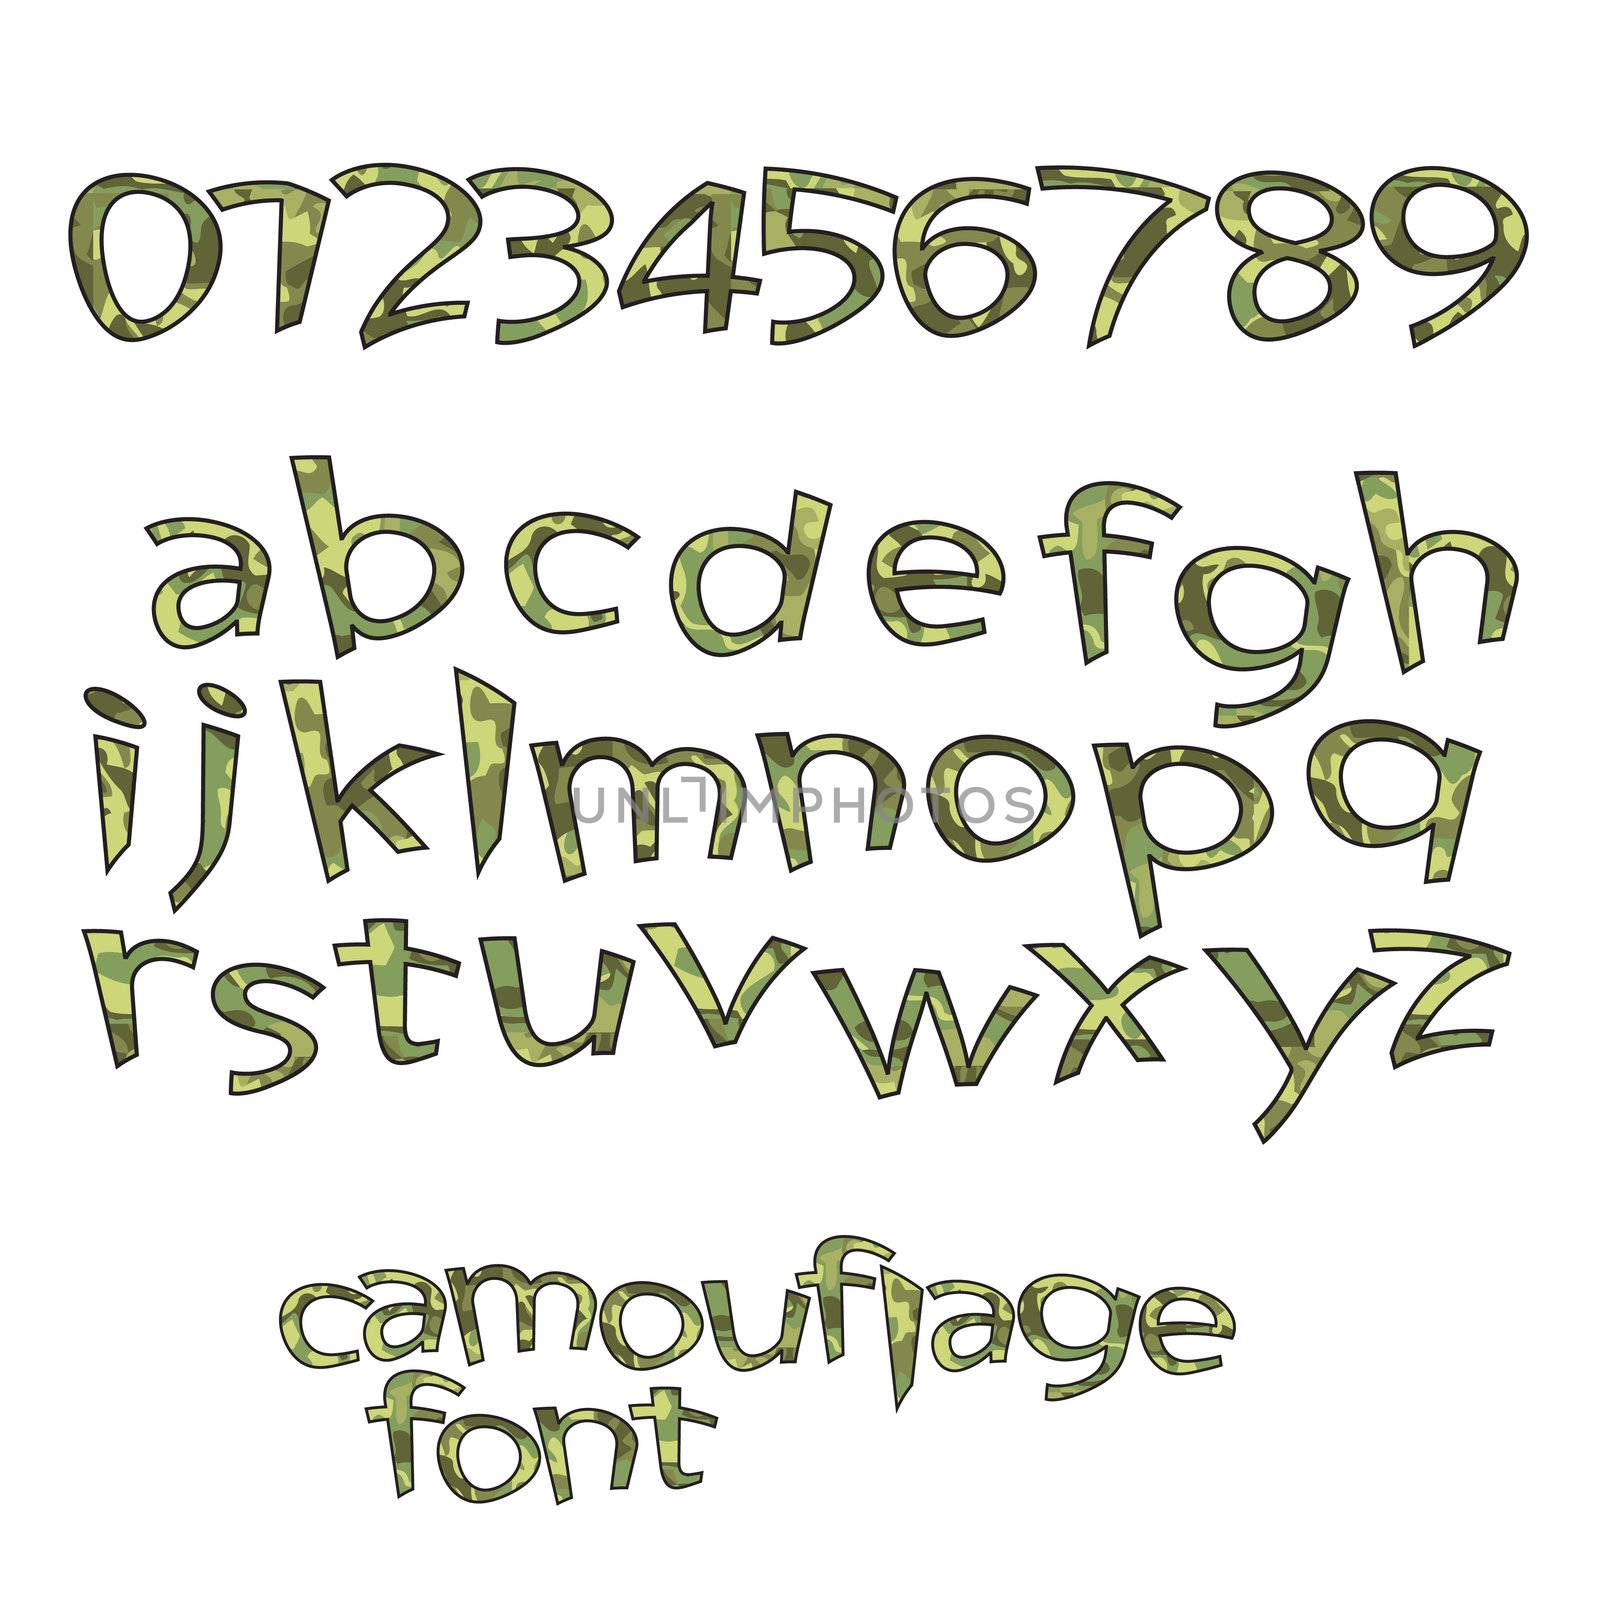 camouflage font by metrue